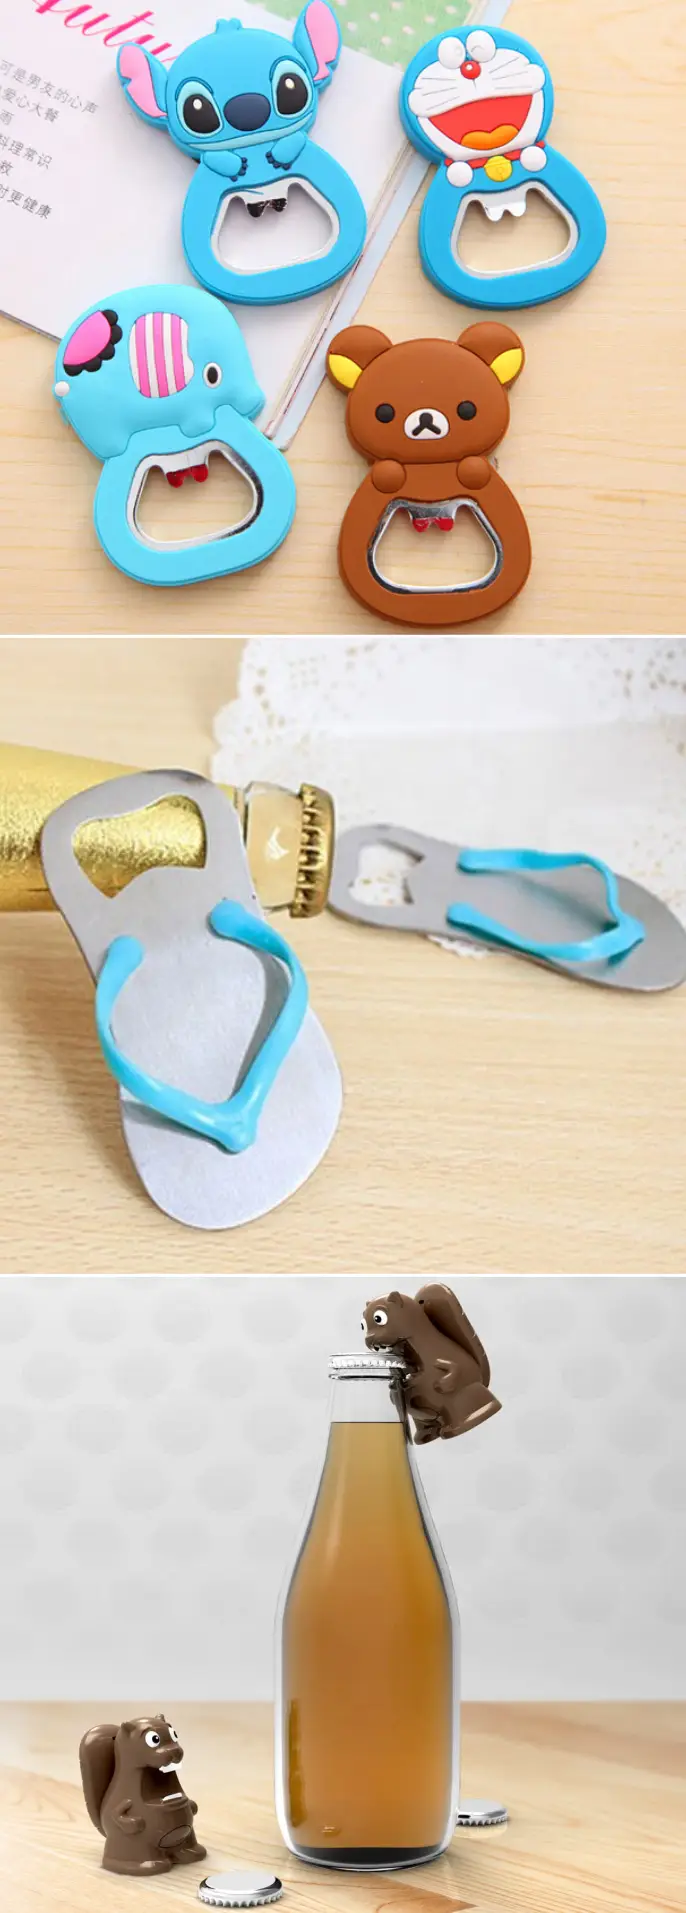 https://www.dontpayfull.com/blog/wp-content/uploads/2015/04/The-Cutest-20-Household-Gadgets-Cool-Can-and-Bottle-Opener.jpg.webp